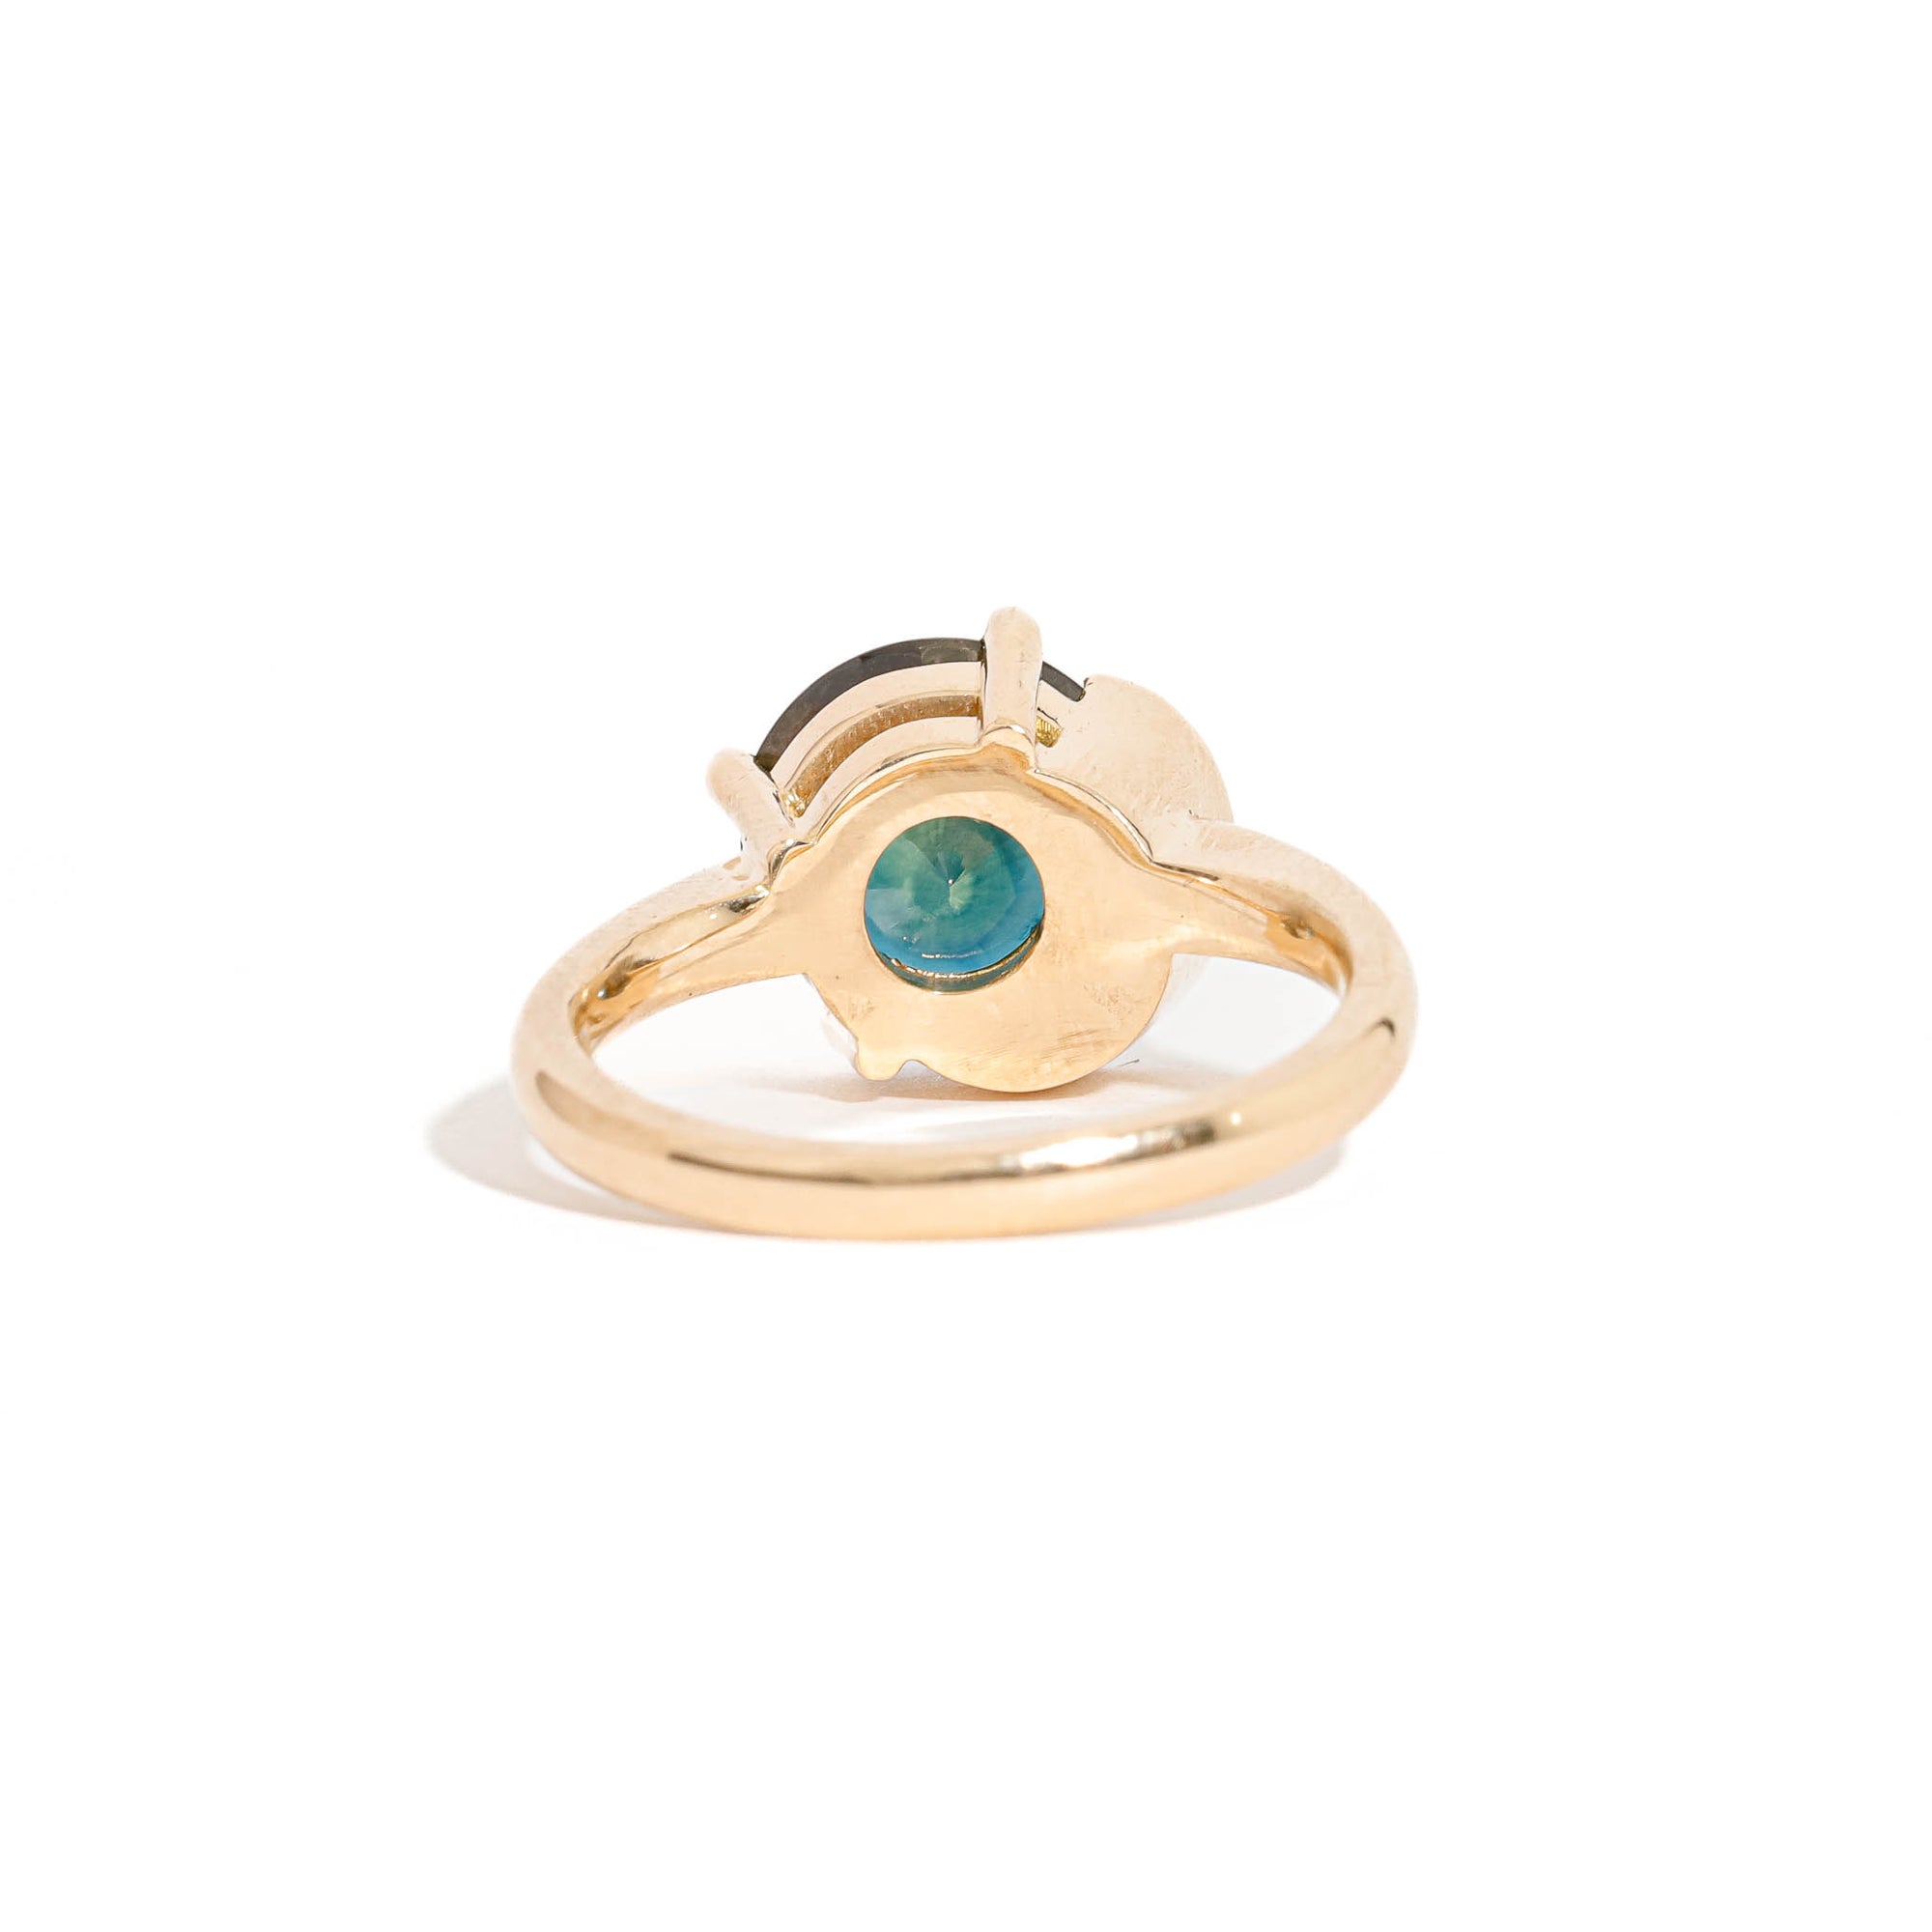  Round Brilliant Cut Teal Sapphire with Half Halo of White Diamonds in 18 Carat Yellow Gold